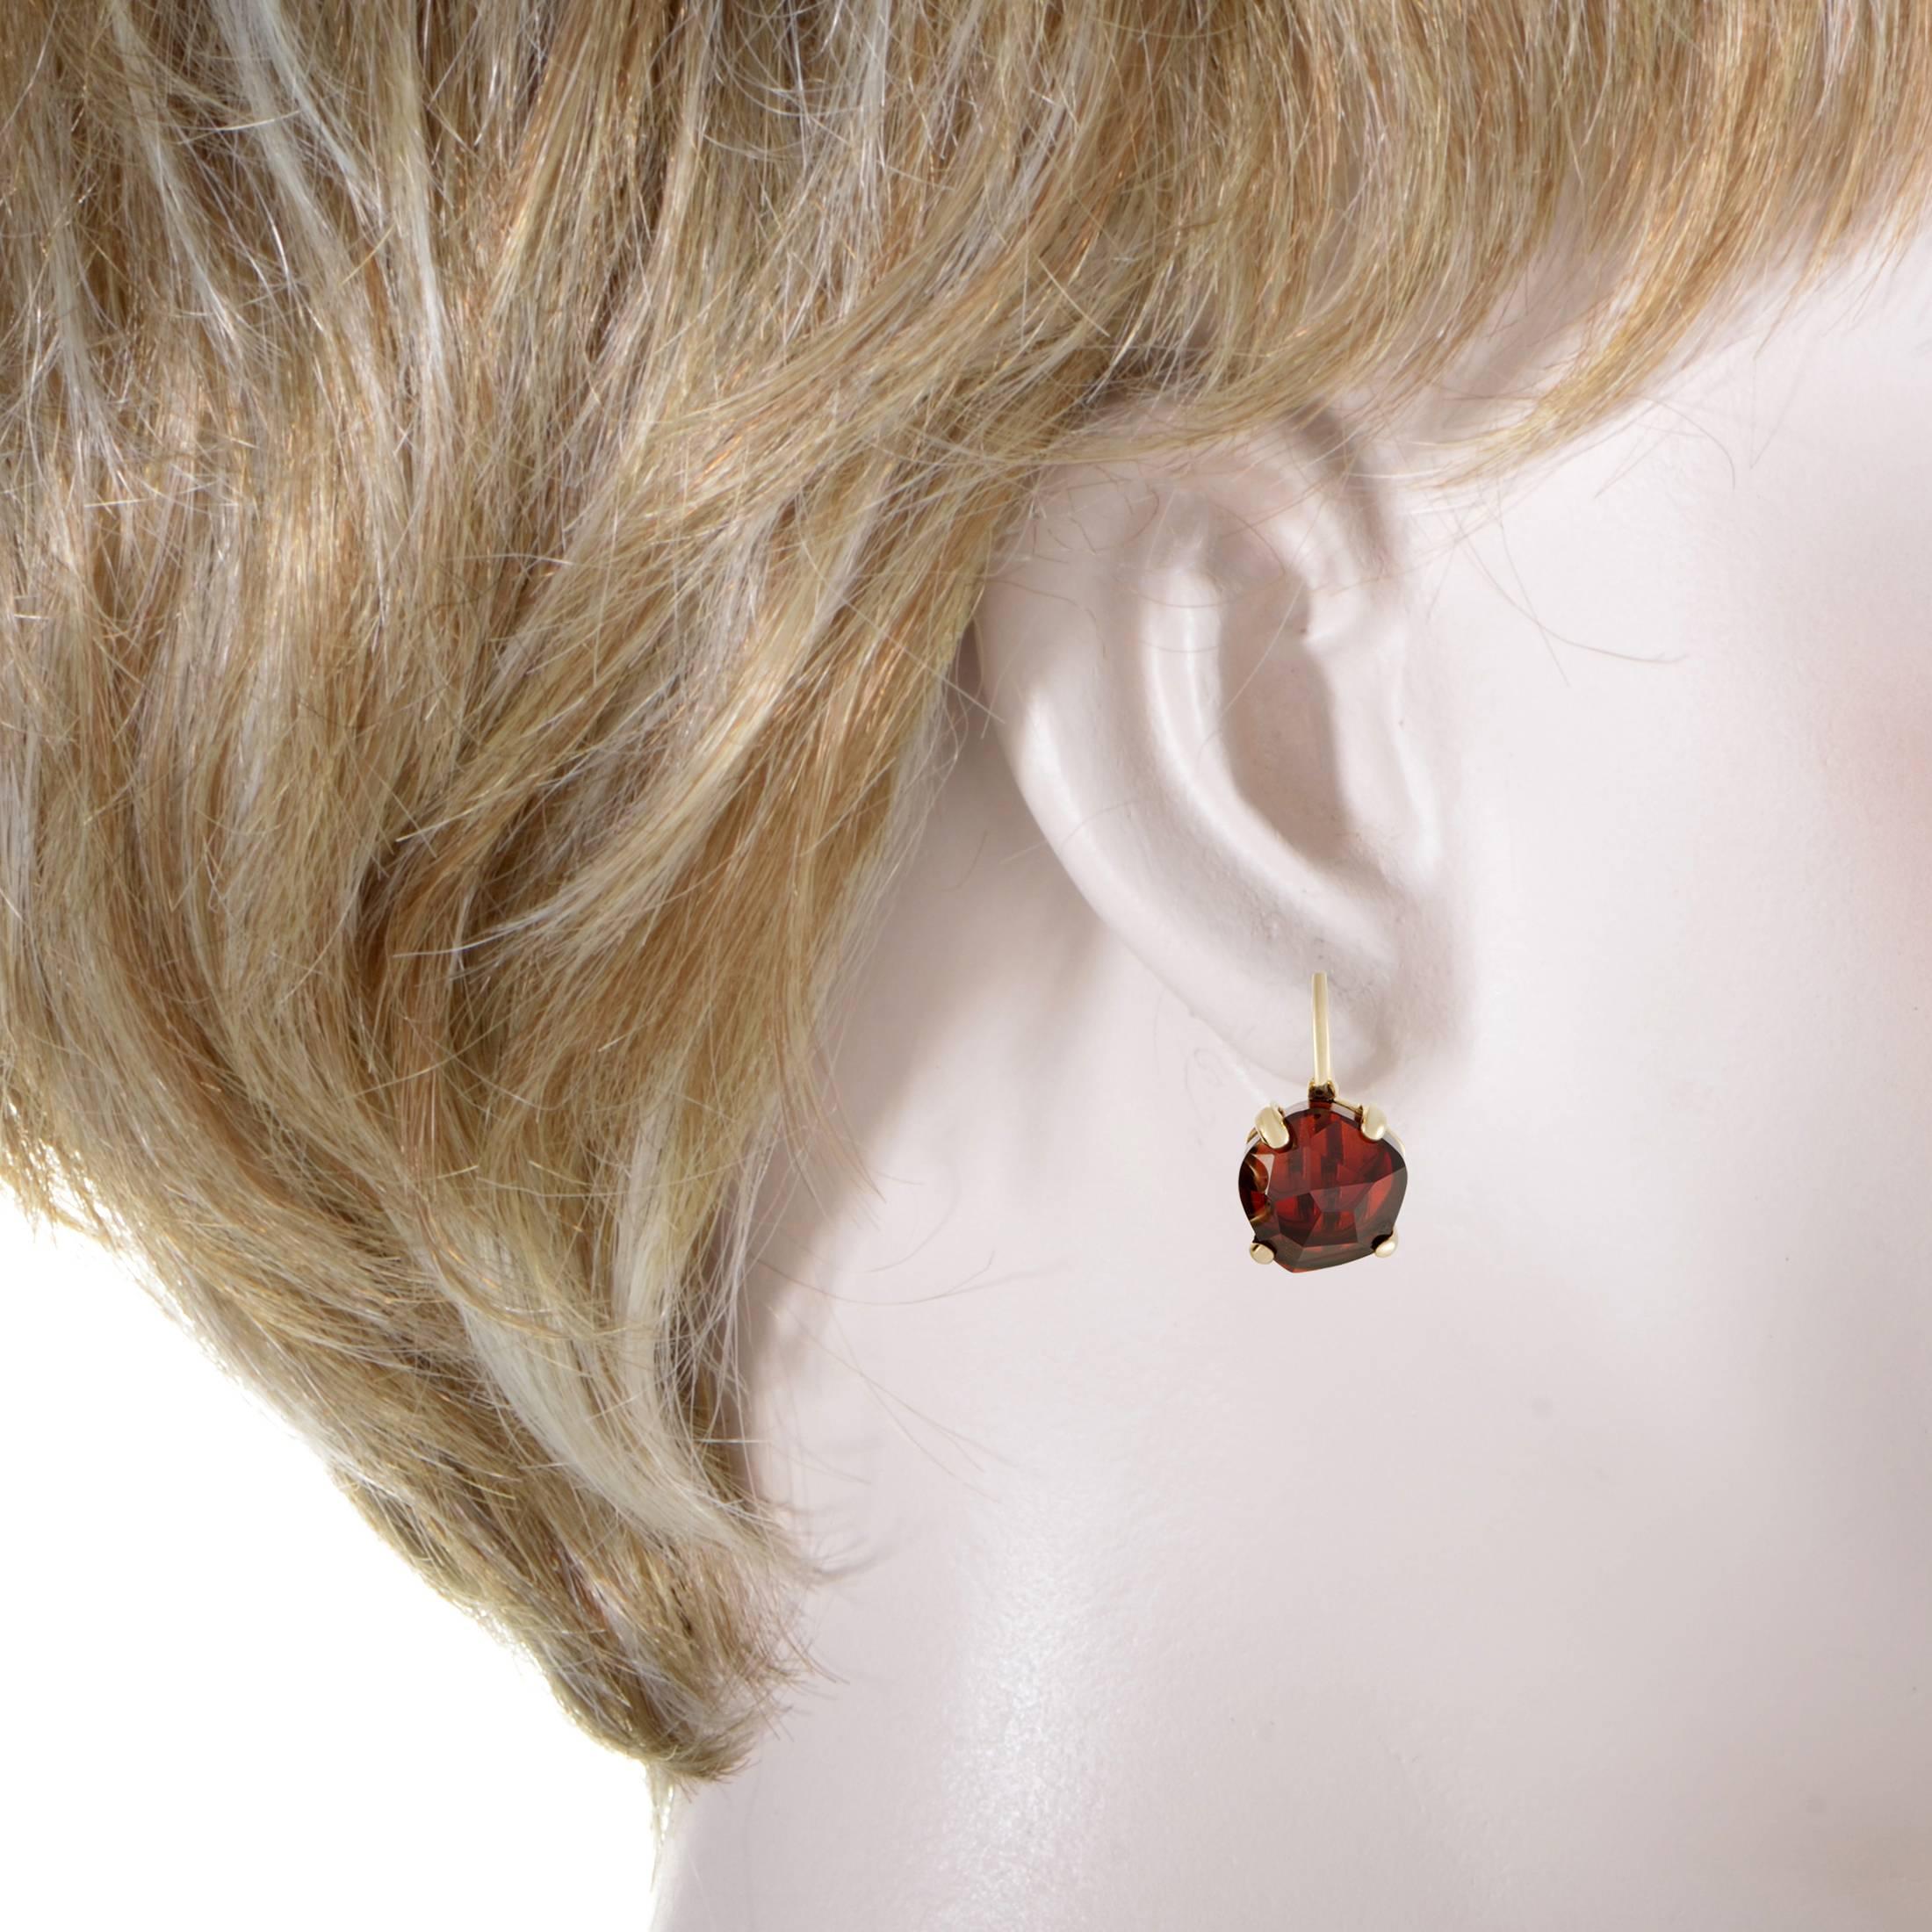 Focusing on the exquisitely faceted shape and fantastically deep and dark color as well as sheer size of the regal garnet stones, Pomellato created these gorgeous Lola earrings made of complementing 18K yellow gold.
Included Items: Manufacturer's